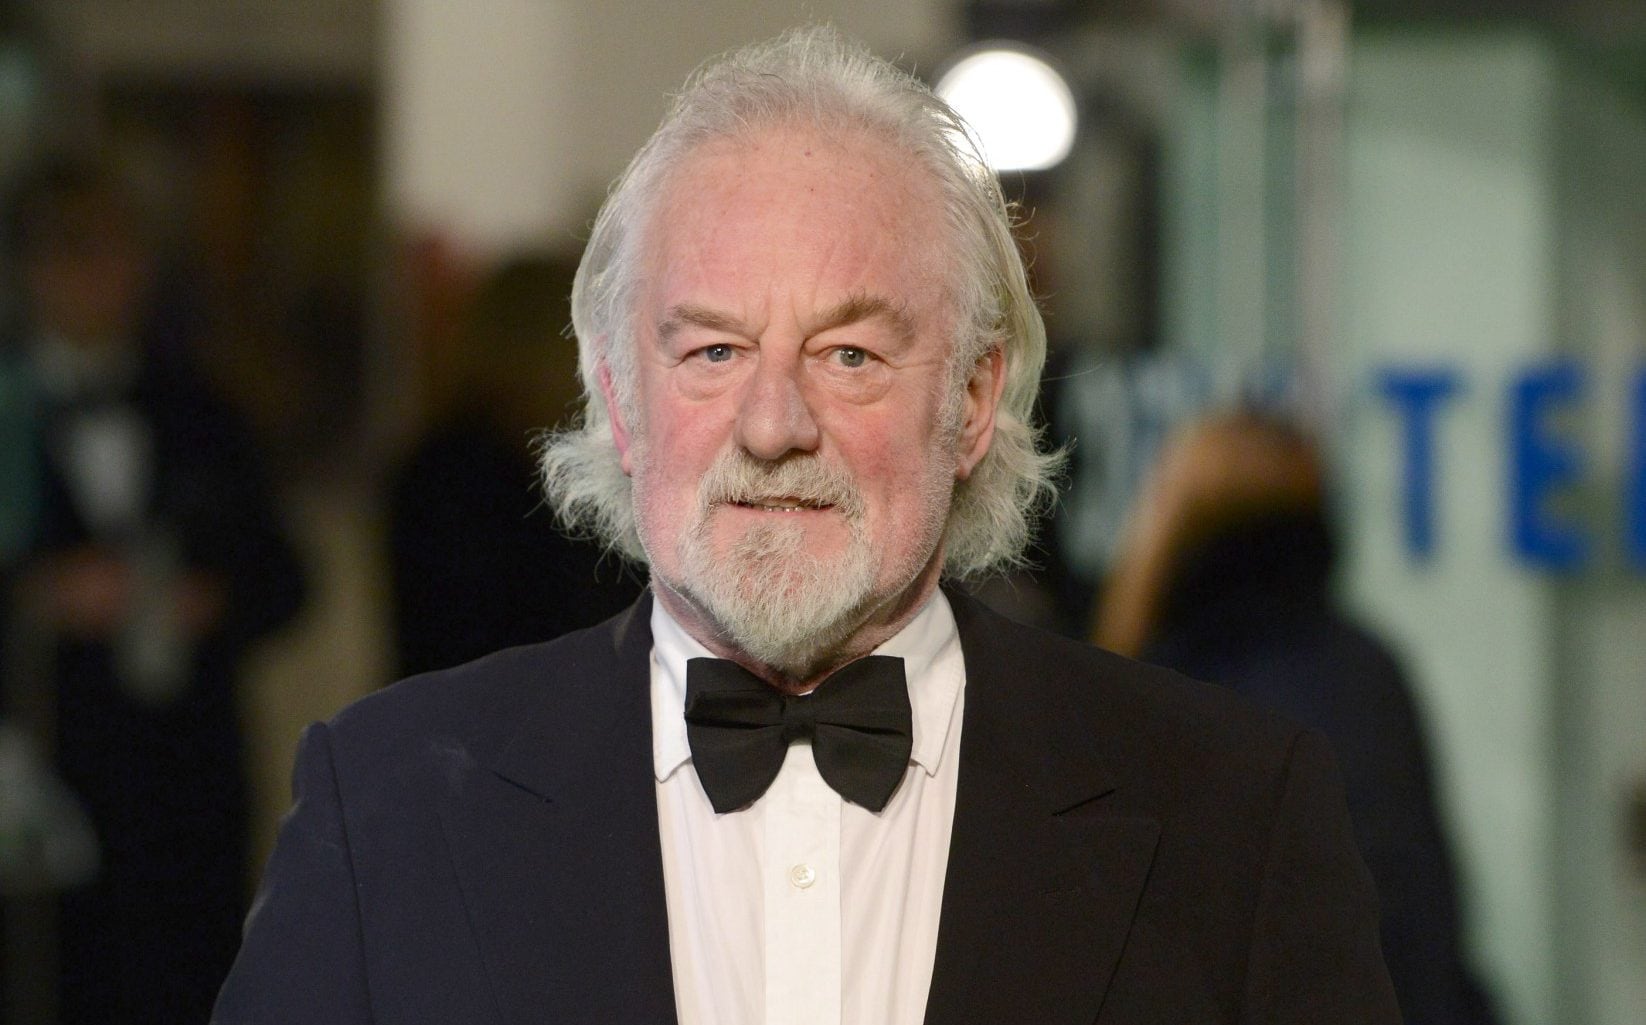 titanic and boys from the blackstuff actor bernard hill dies aged 79